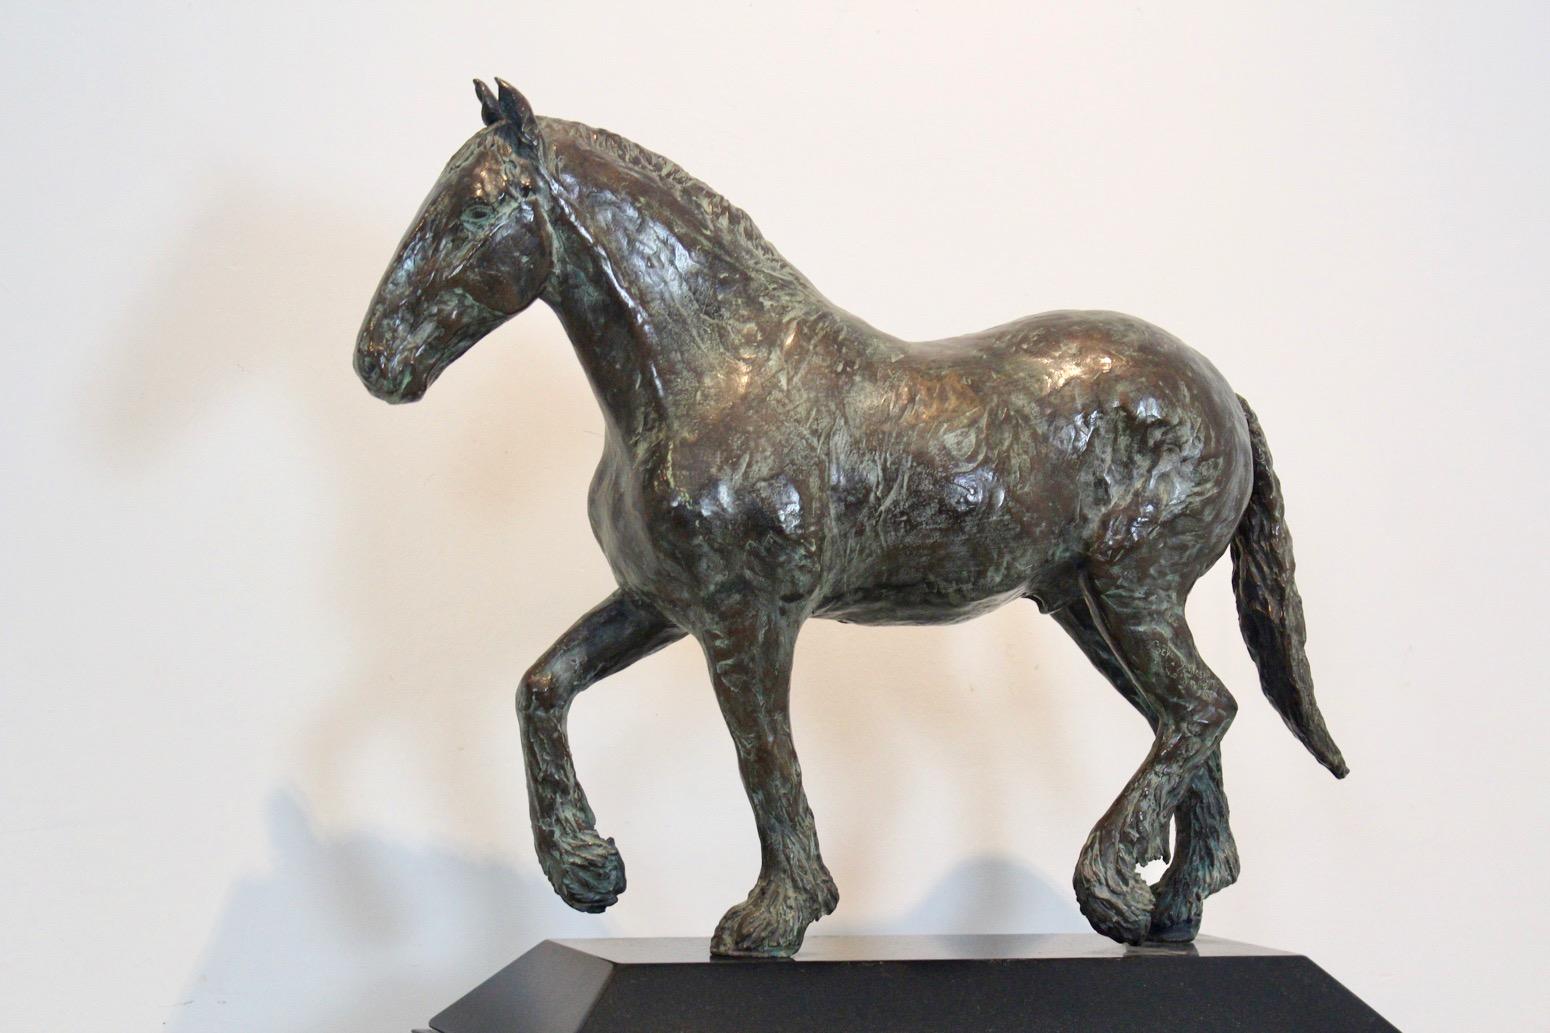 A truly eye-catching bronze sculpture named ‘a Horse’, designed and made by Dutch Sculpture Artist Cocky Duijvesteijn van der Gun. Number 2 of 8 ever made, signed by the artist and numbered on the left rear leg. In very good condition. Made of